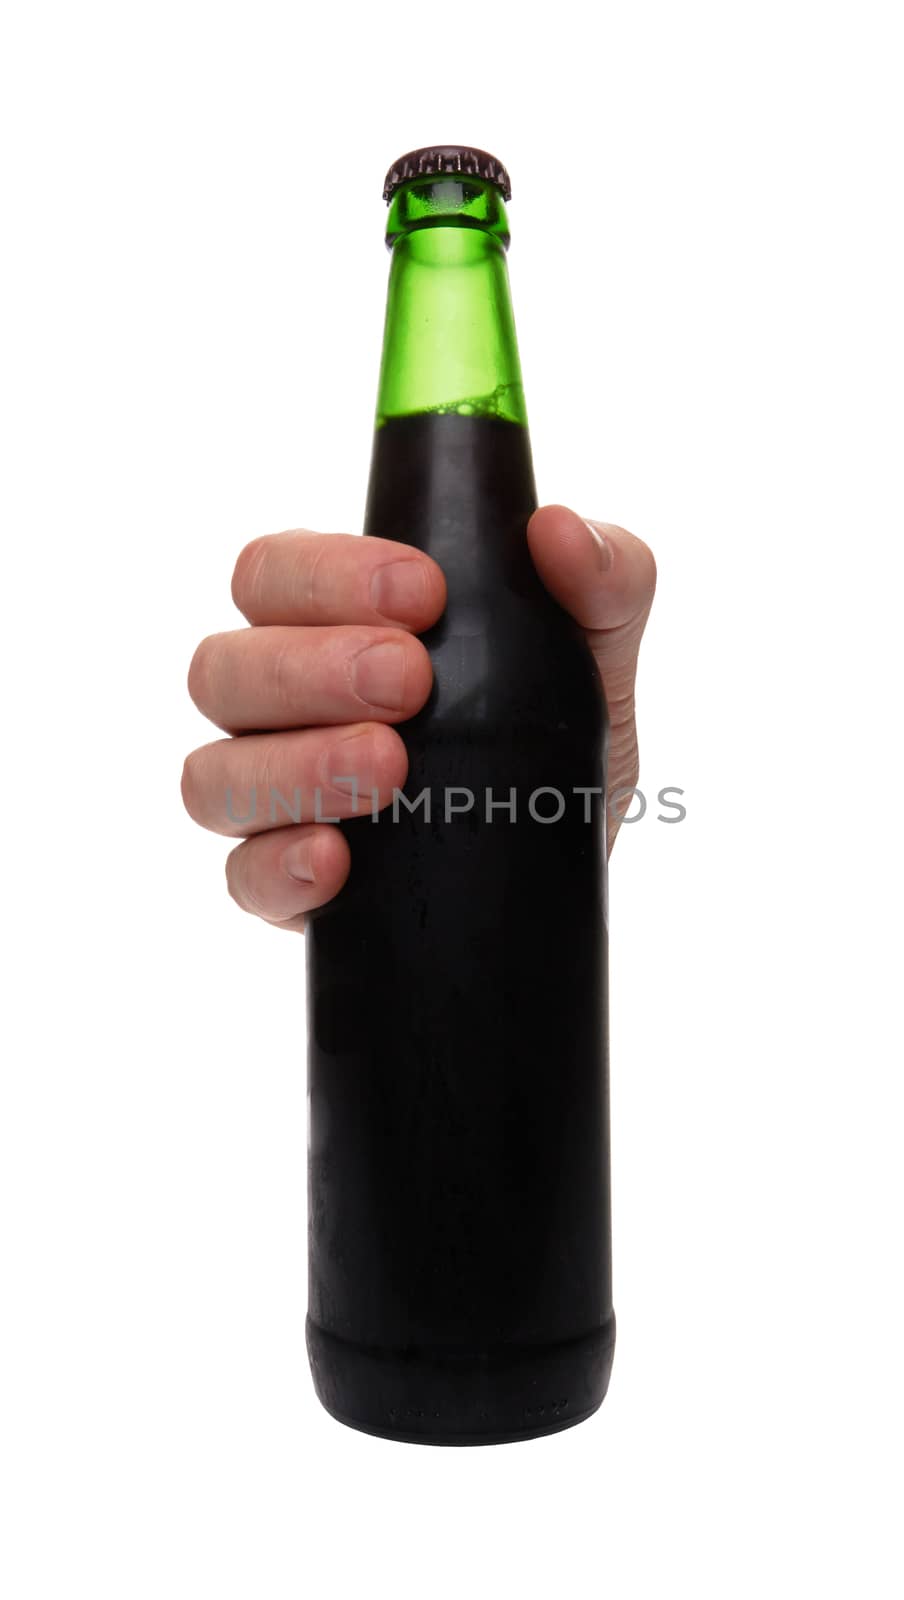 hand holding beer bottle by pioneer111